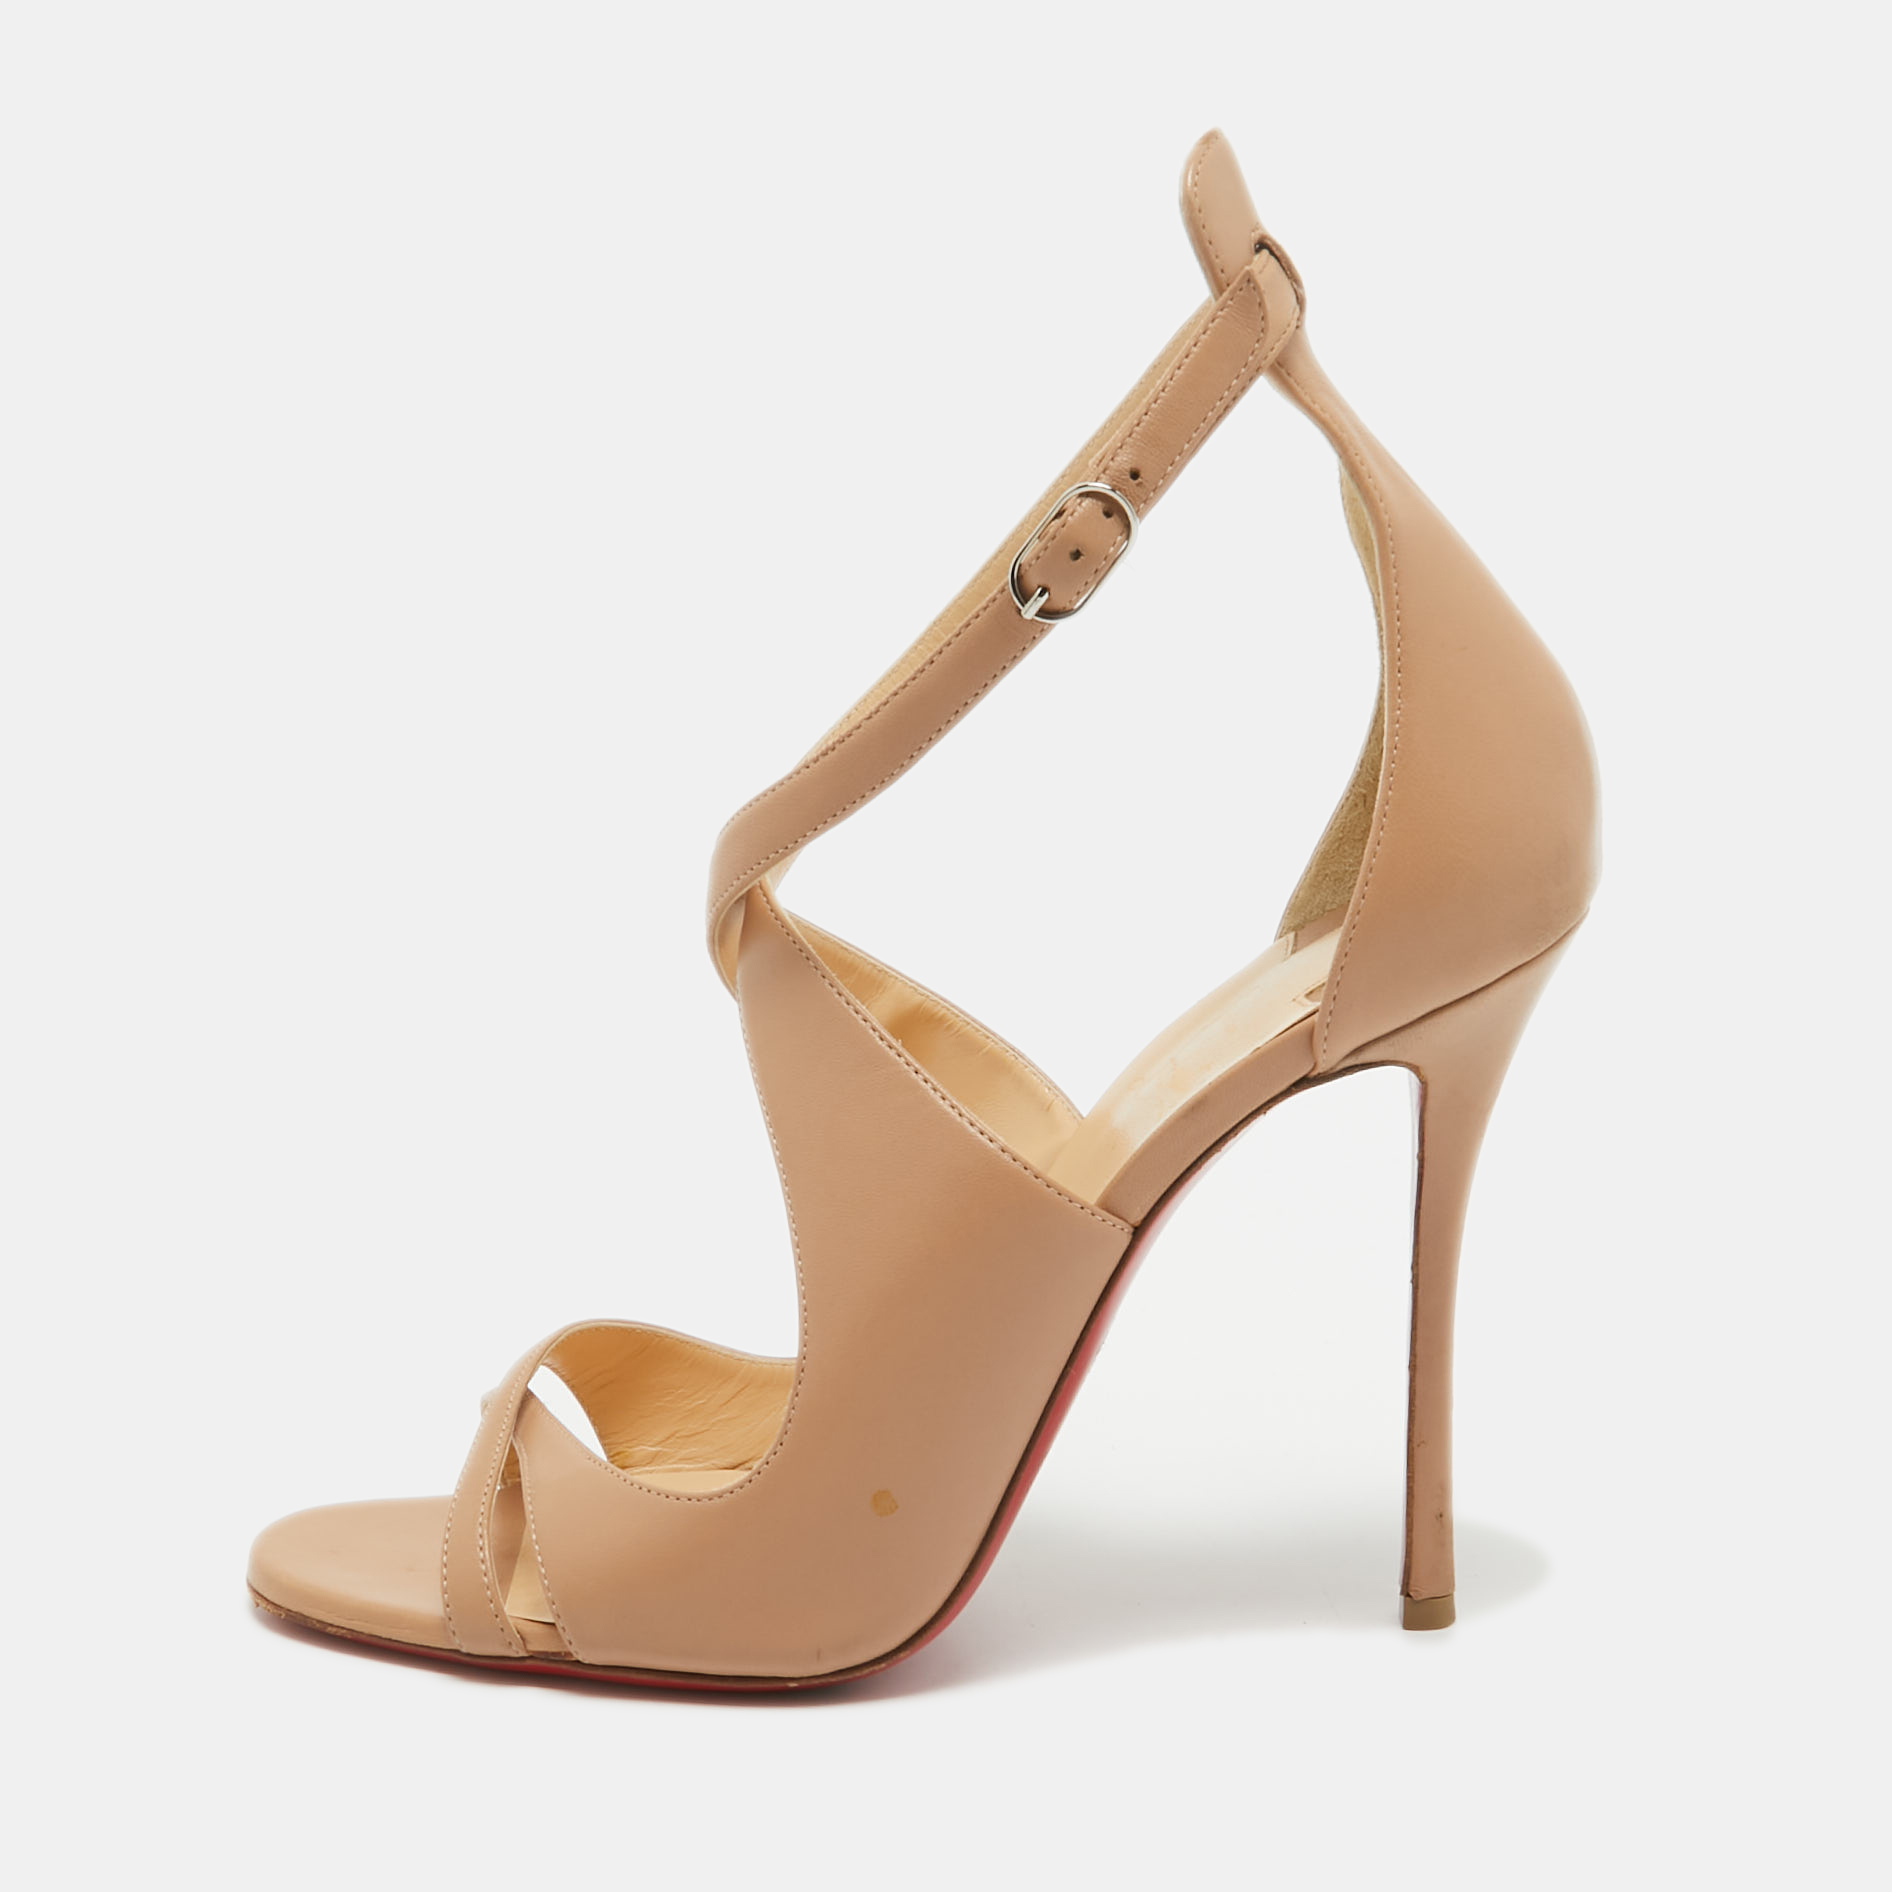 

Christian Louboutin Beige Leather Malefissima Ankle Strap Sandals Size